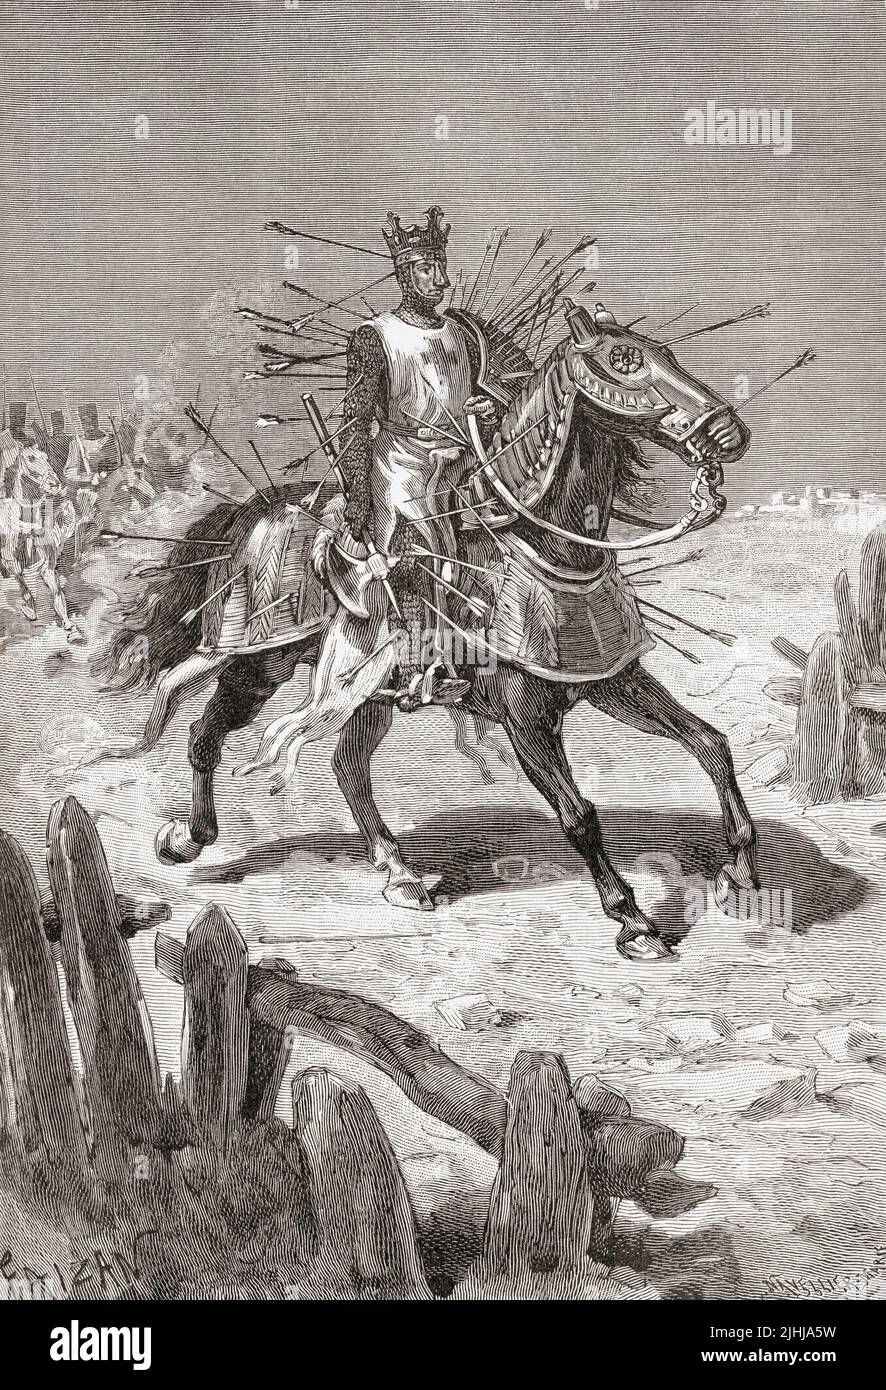 A spectacularly exaggerated drawing of Richard the Lionheart and his horse emerging from the Battle of Arsuf after being hit by dozens of arrows but obviously not hors de combat.  The Battle of Arsuf, 7 September 1191, during the Third Crusade was an important Crusader victory and King Richard’s leadership and bravery during it further cemented his reputation as one of Europe’s great warrior kings.  From Histoire de France, published 1855. Stock Photo